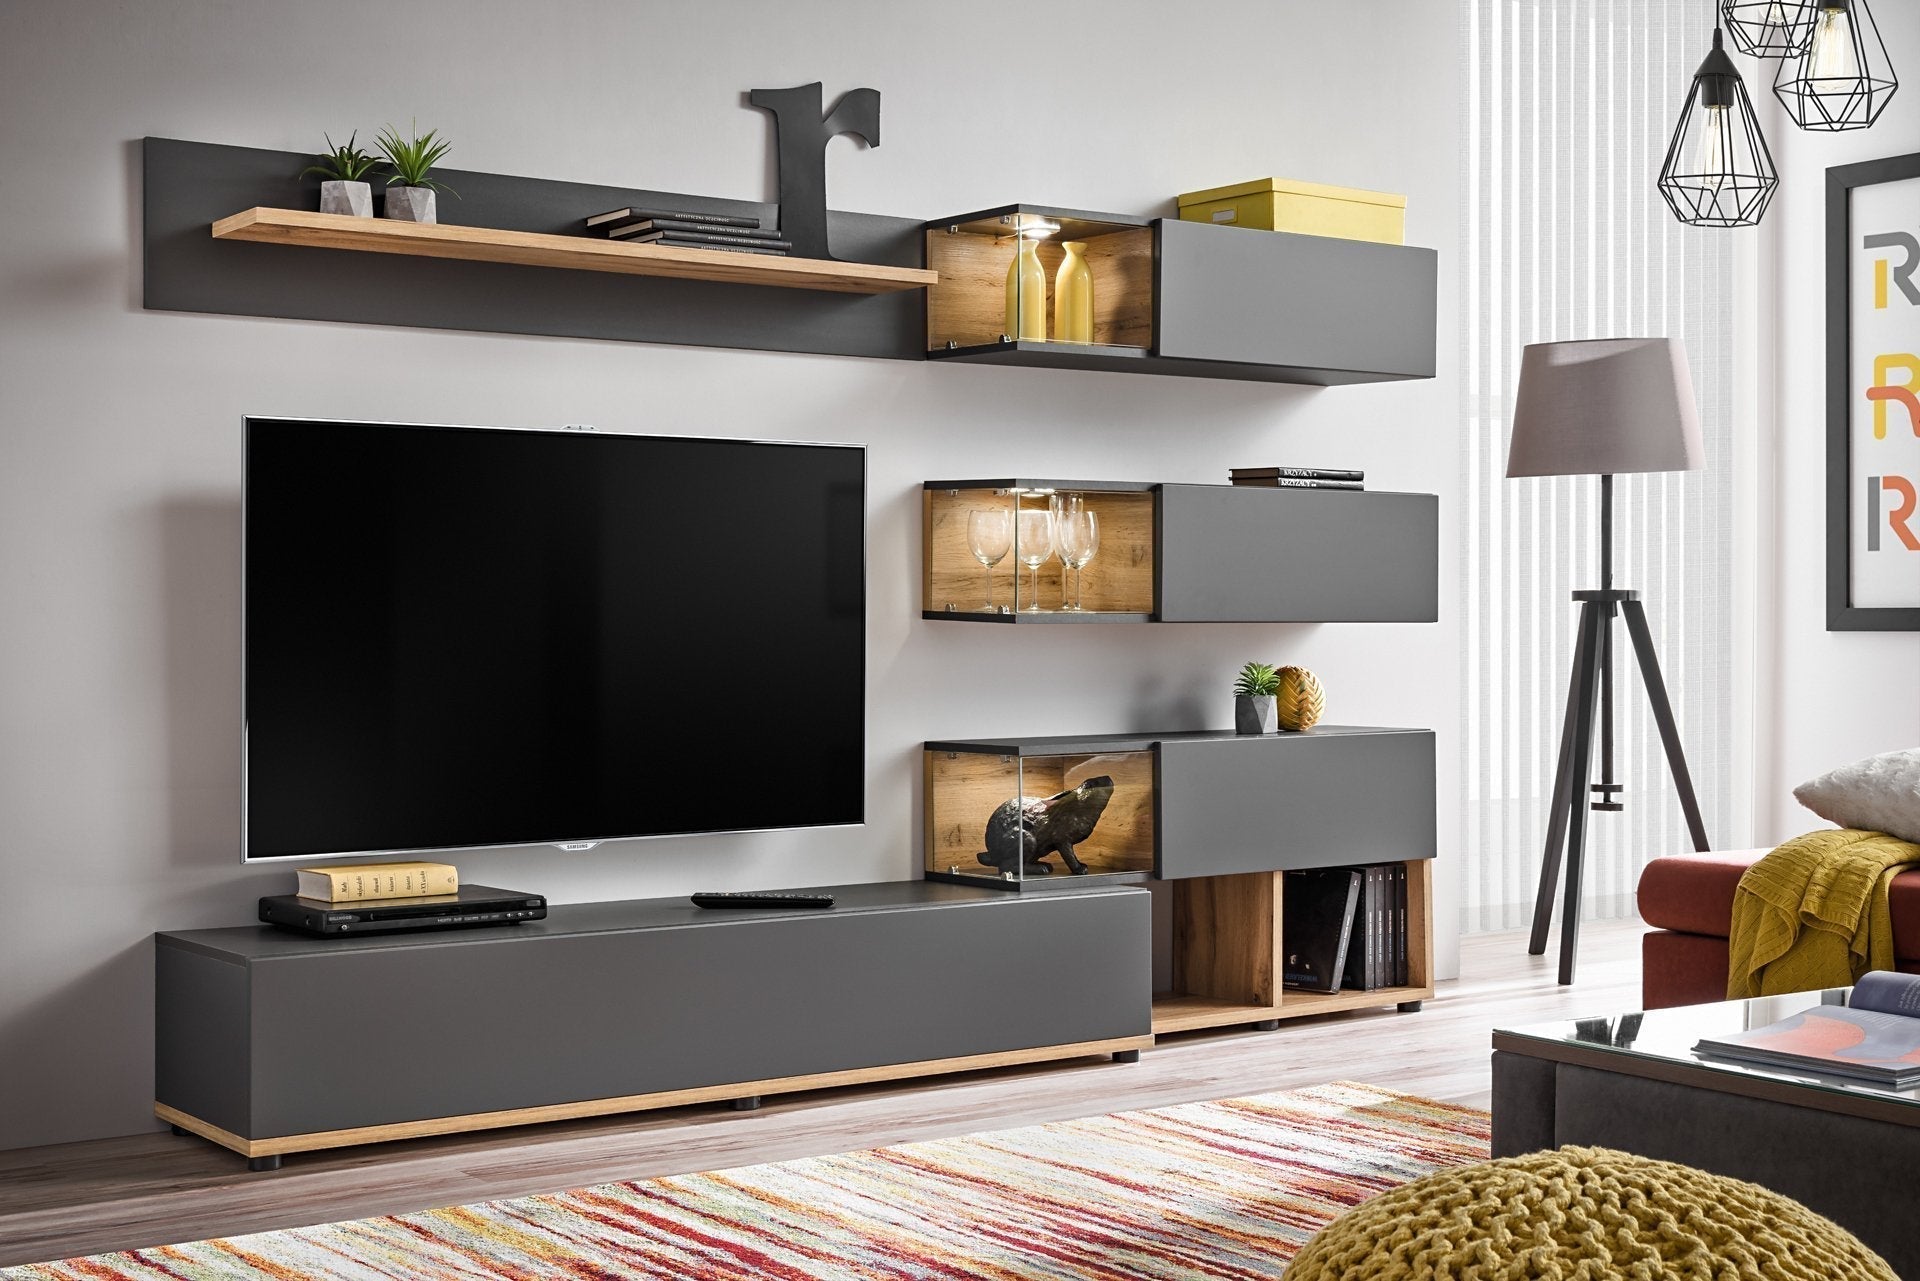 View Silk in Anthracite Entertainment Unit information